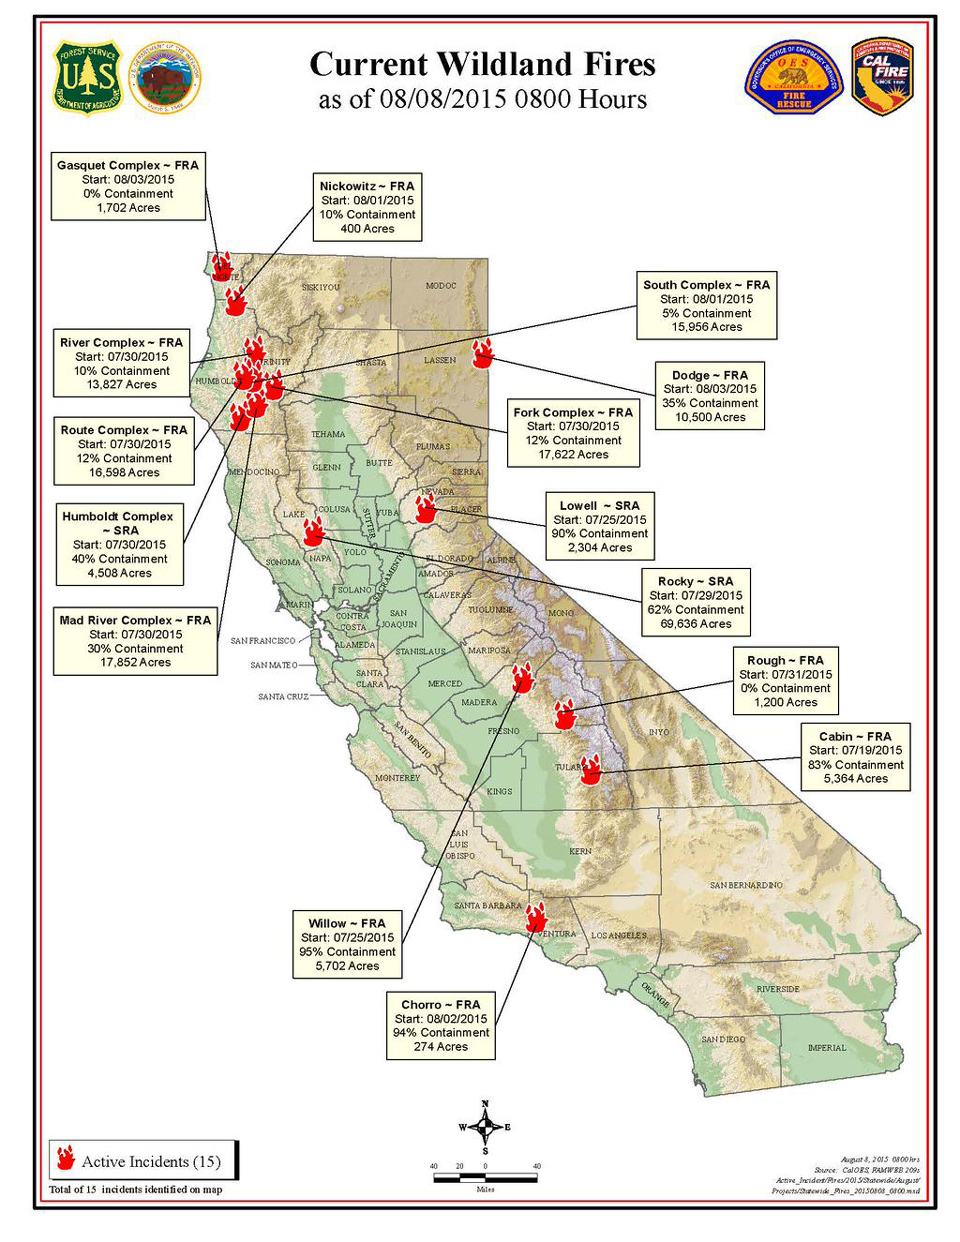 CAL FIRE Saturday Morning August 8, 2015 Report on Wildfires in